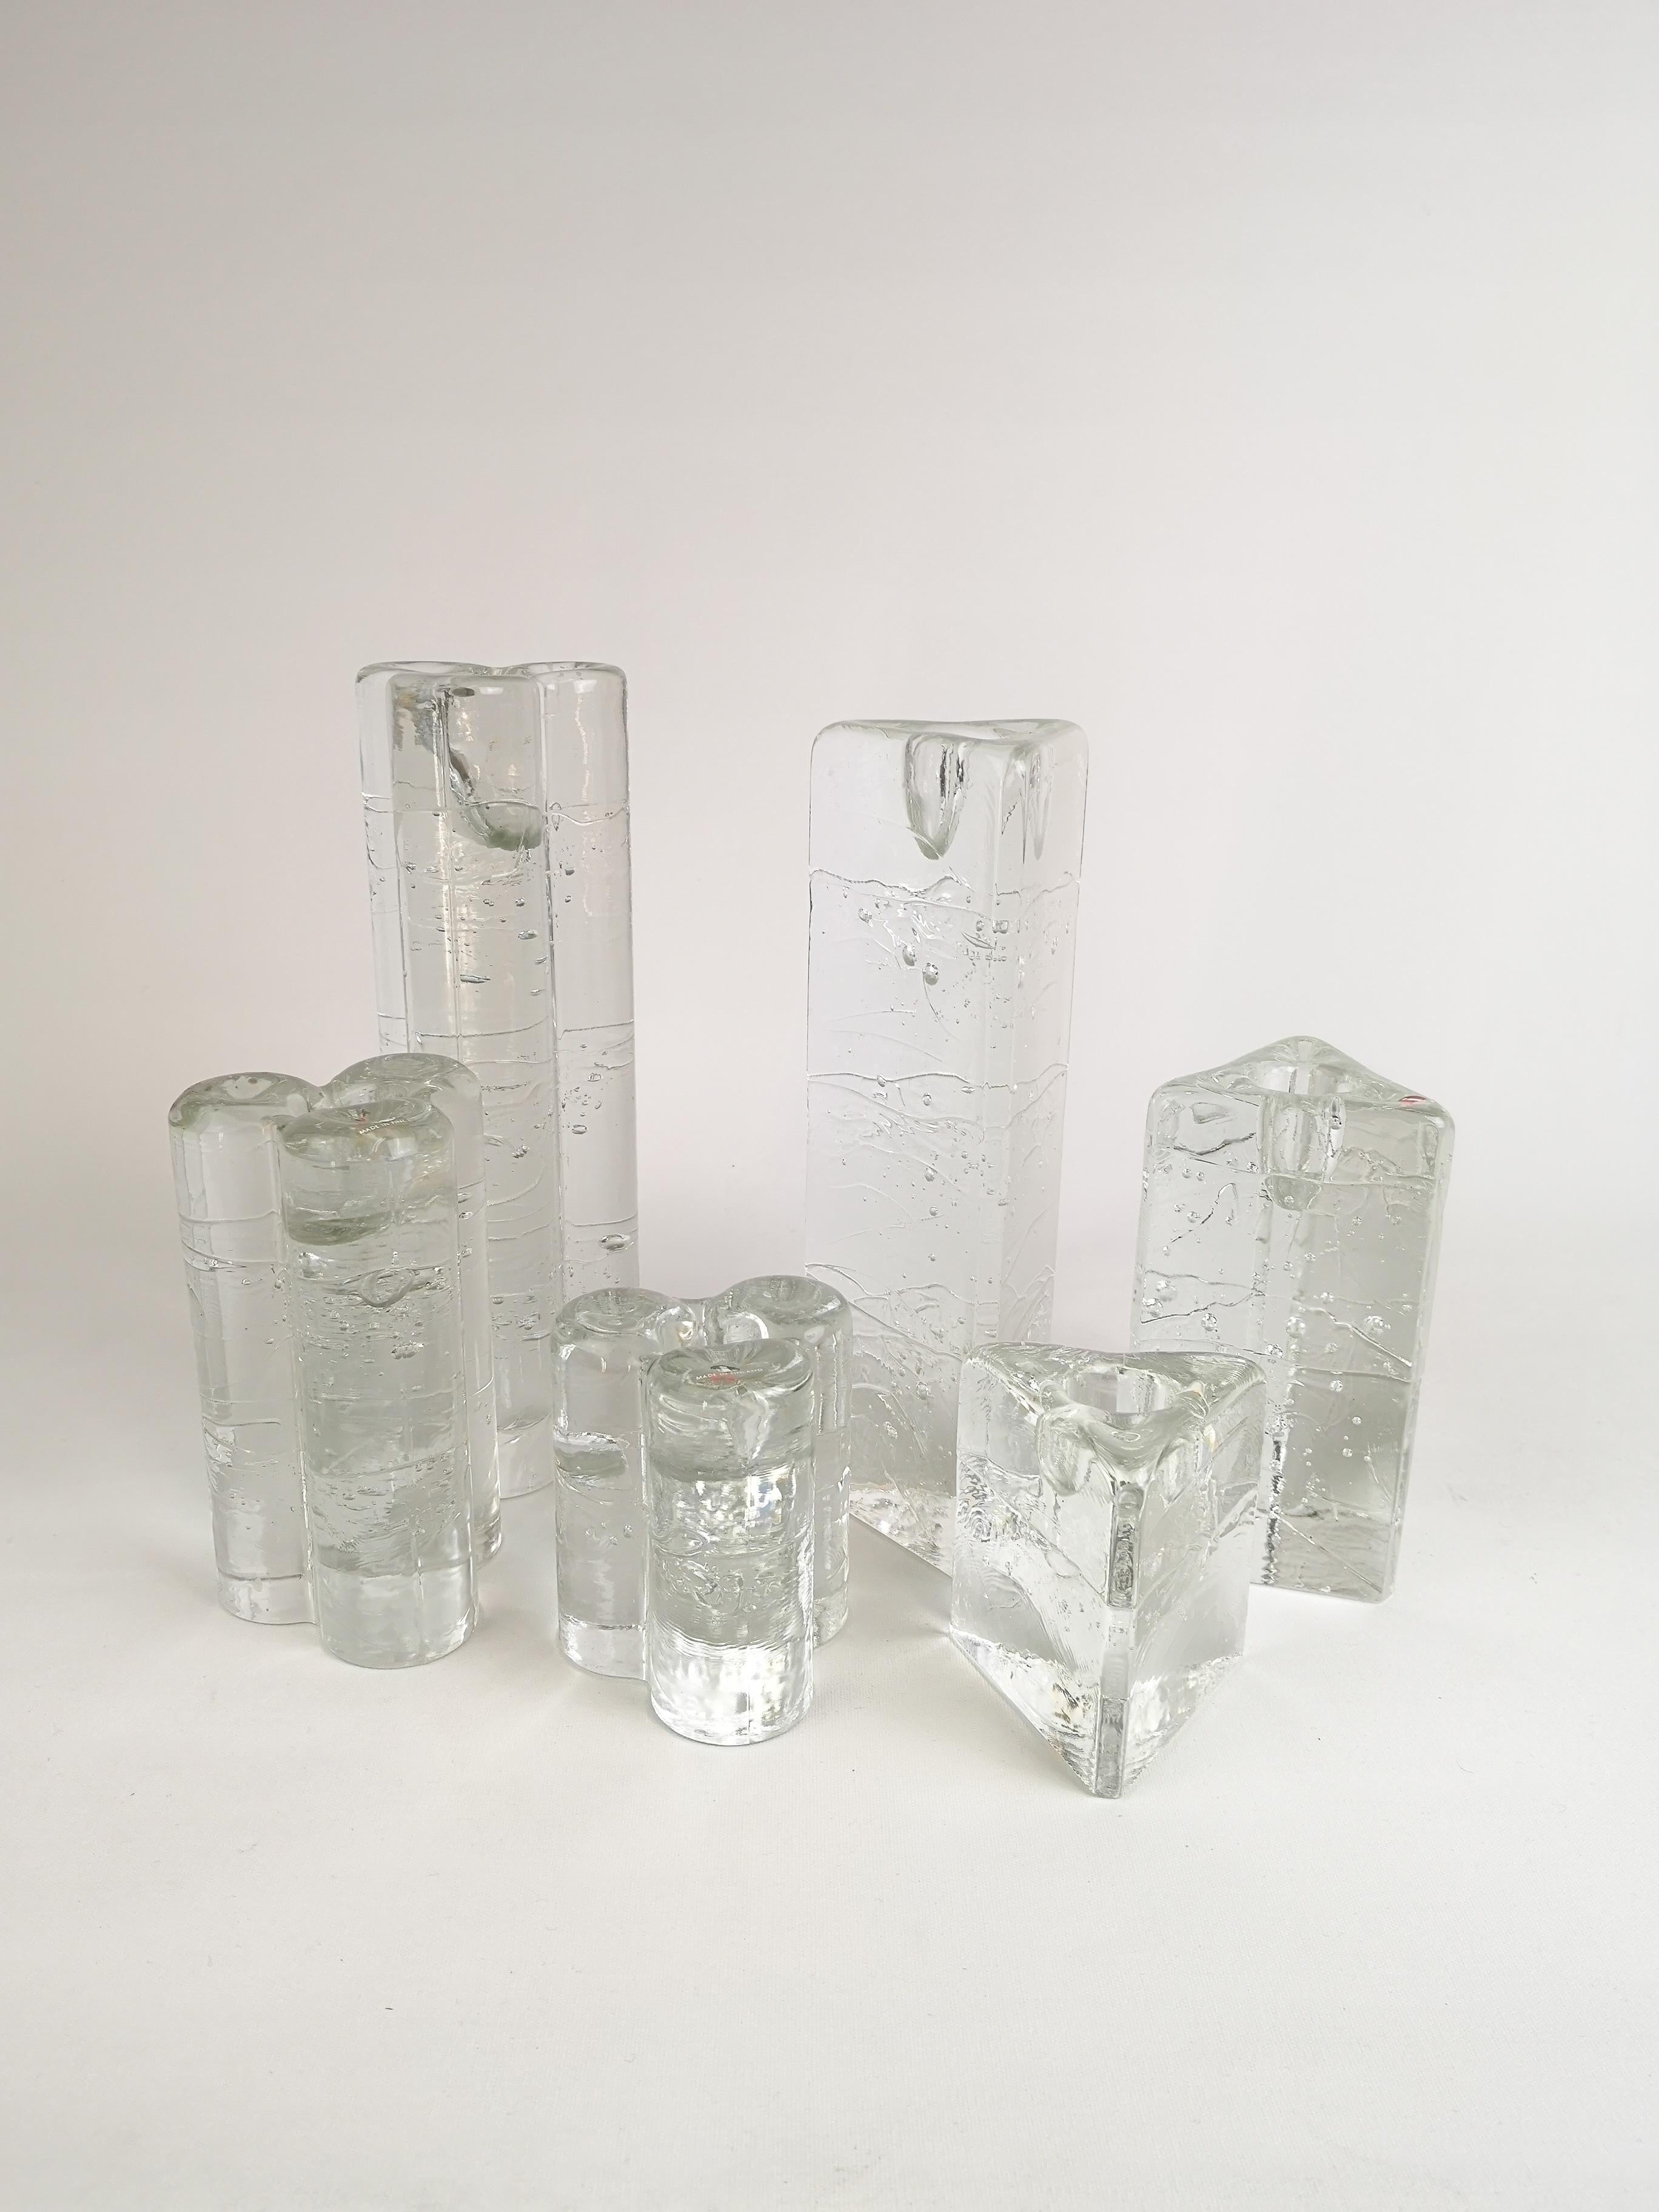 Group of 6 Iittala Arkipelago candlesticks in round and triangular forms.
Architectural cast clear glass blocks.
With bubbles. They are created to appear as if they were is blocks. They are designed by Timo Sarpaneva in the 1970s for Iittala